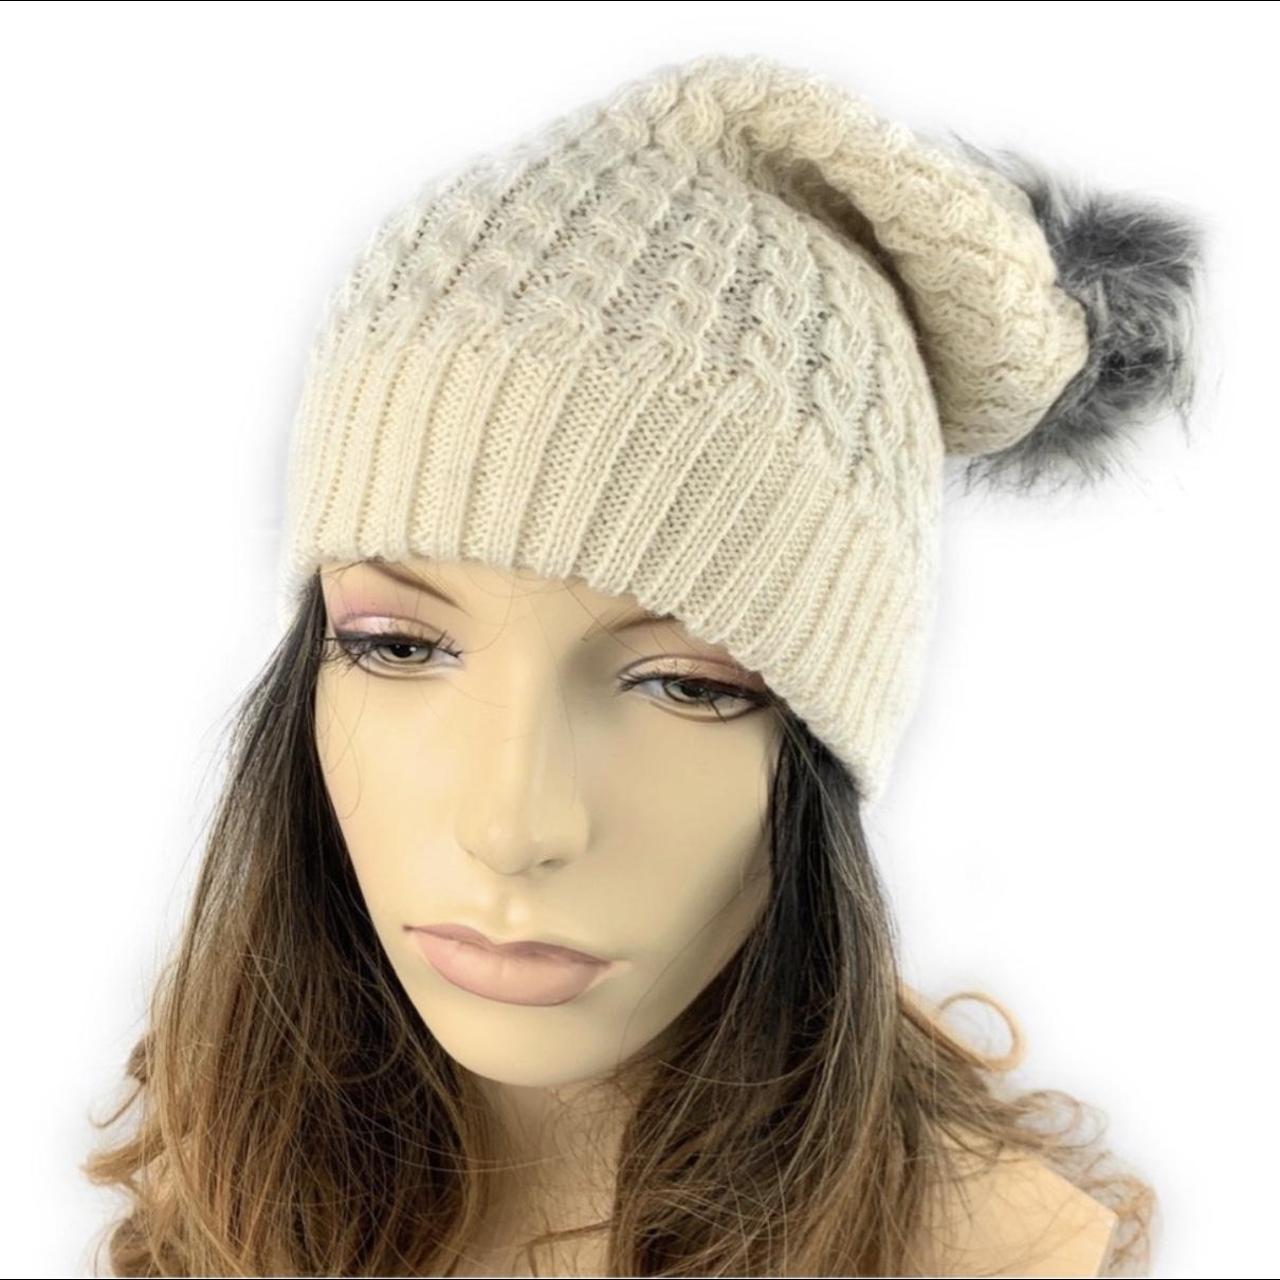 Product Image 1 - Slouch Beanie With Pom Ivory
This